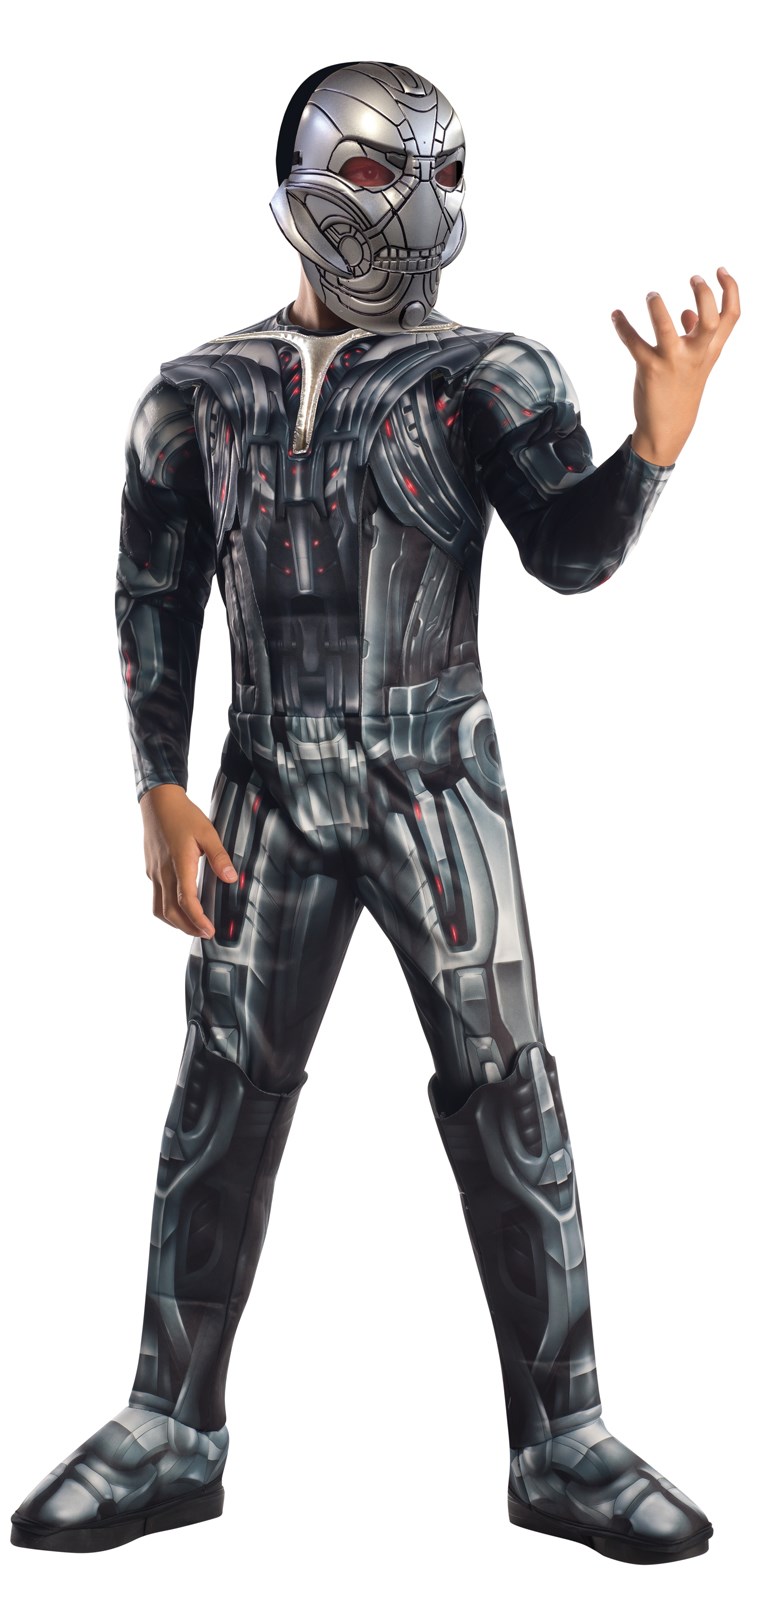 Avengers 2 - Age of Ultron: Deluxe Ultron Kids Costume